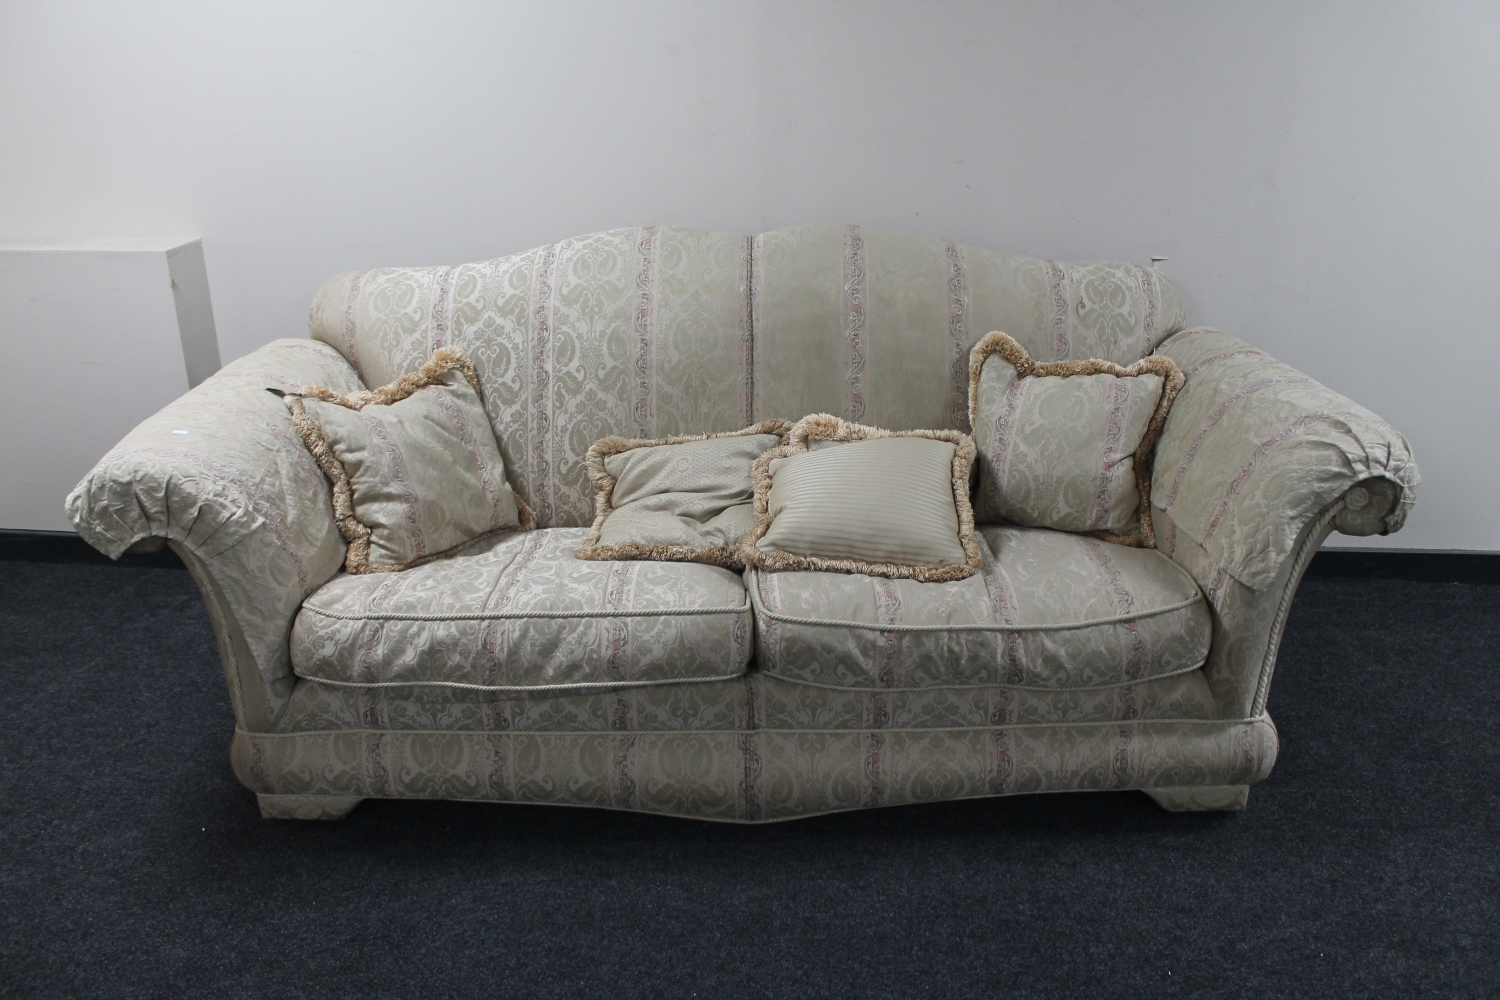 A two seater settee with loose cushions upholstered in a classical print